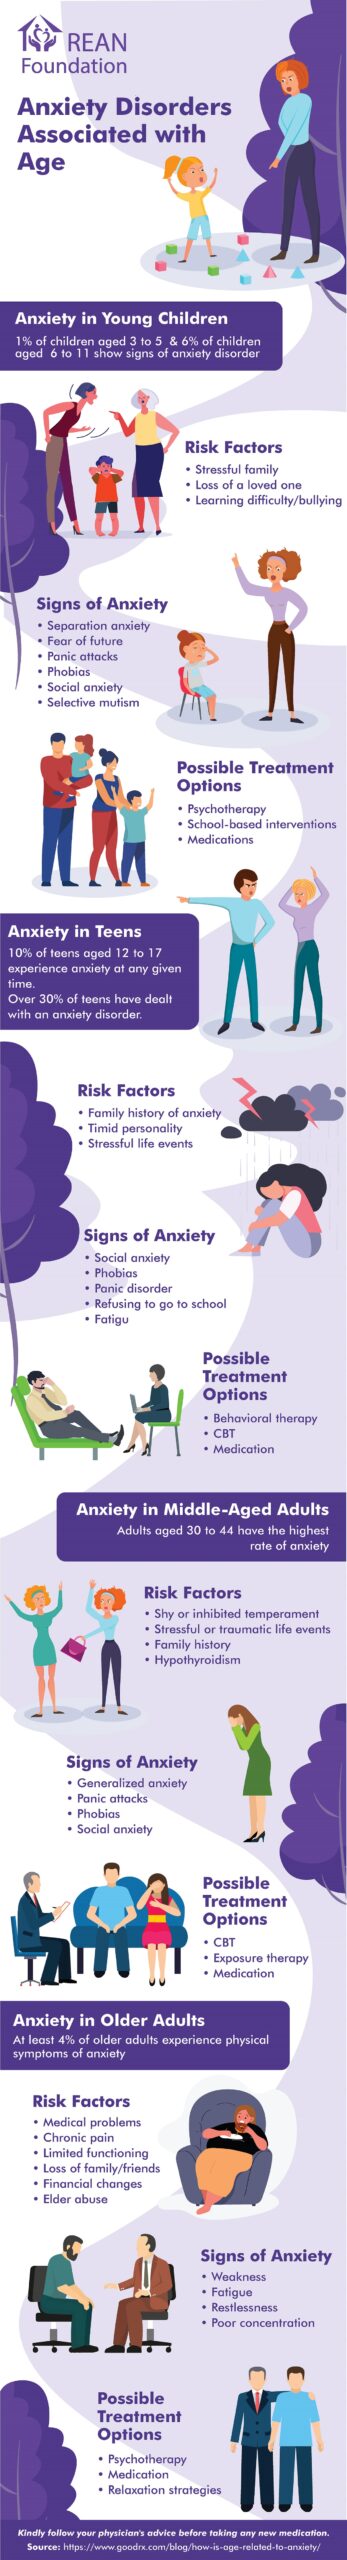 An infographic about anxiety disorders and aging